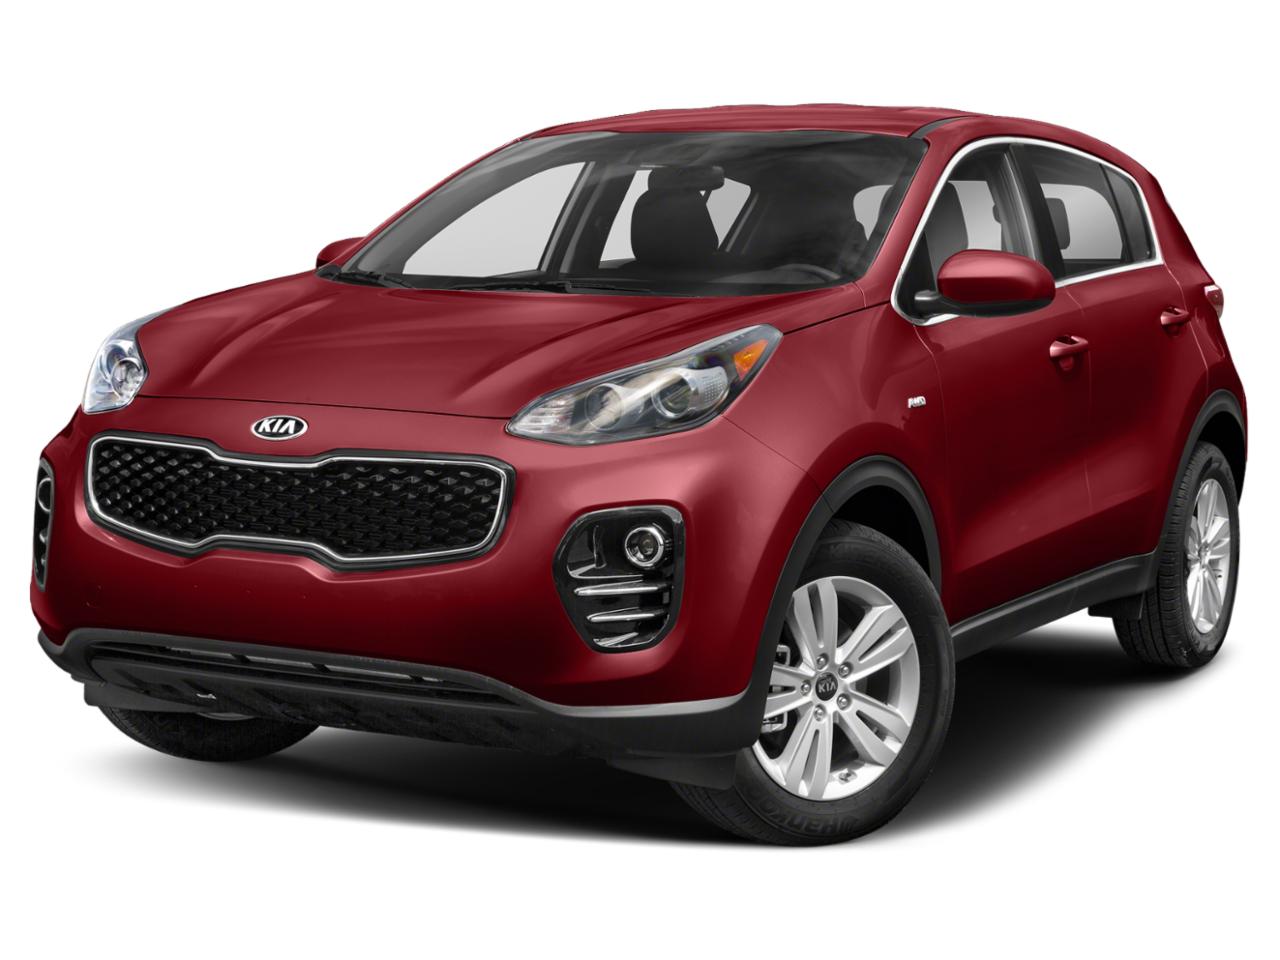 Used 2019 Kia Sportage LX AWD in Hyper Red for sale in Gaffney South 